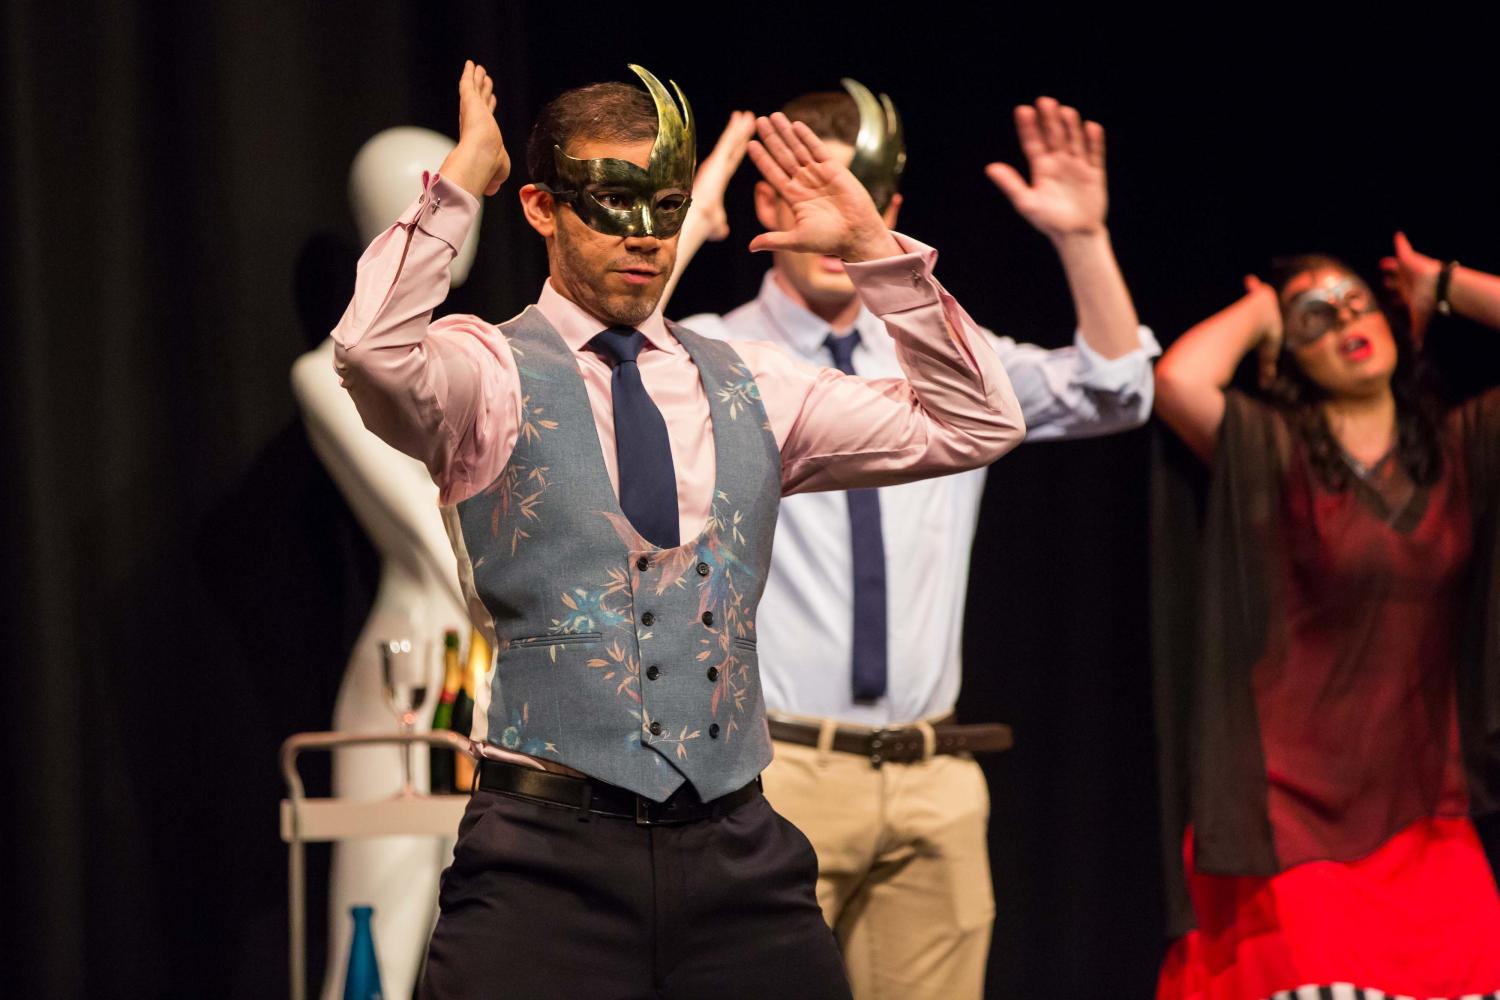 Three singers dancing in Vogue style in hold masks wearing smart trousers and waistcoats and dresses